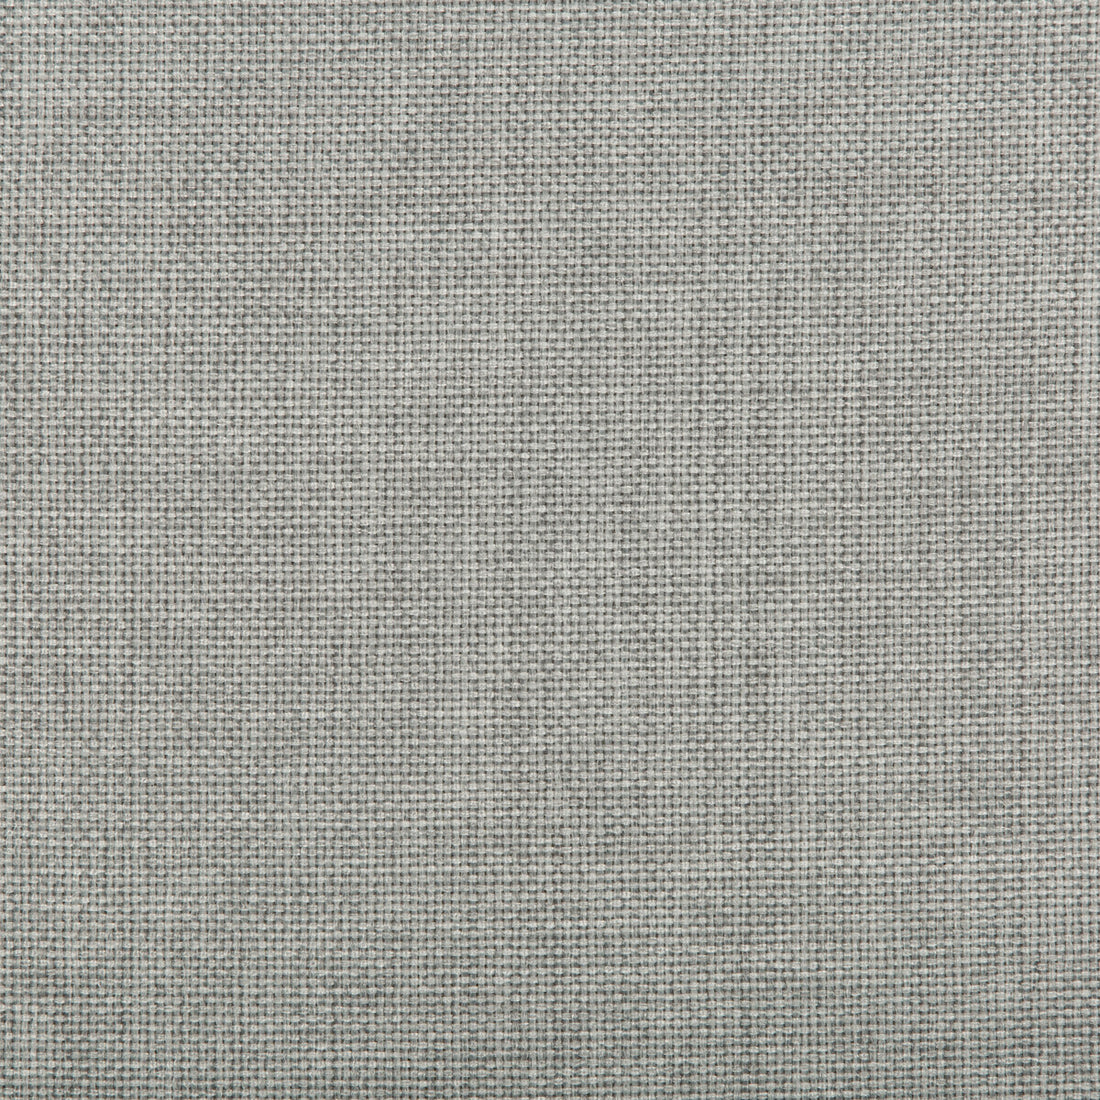 Kravet Contract fabric in 4637-115 color - pattern 4637.115.0 - by Kravet Contract